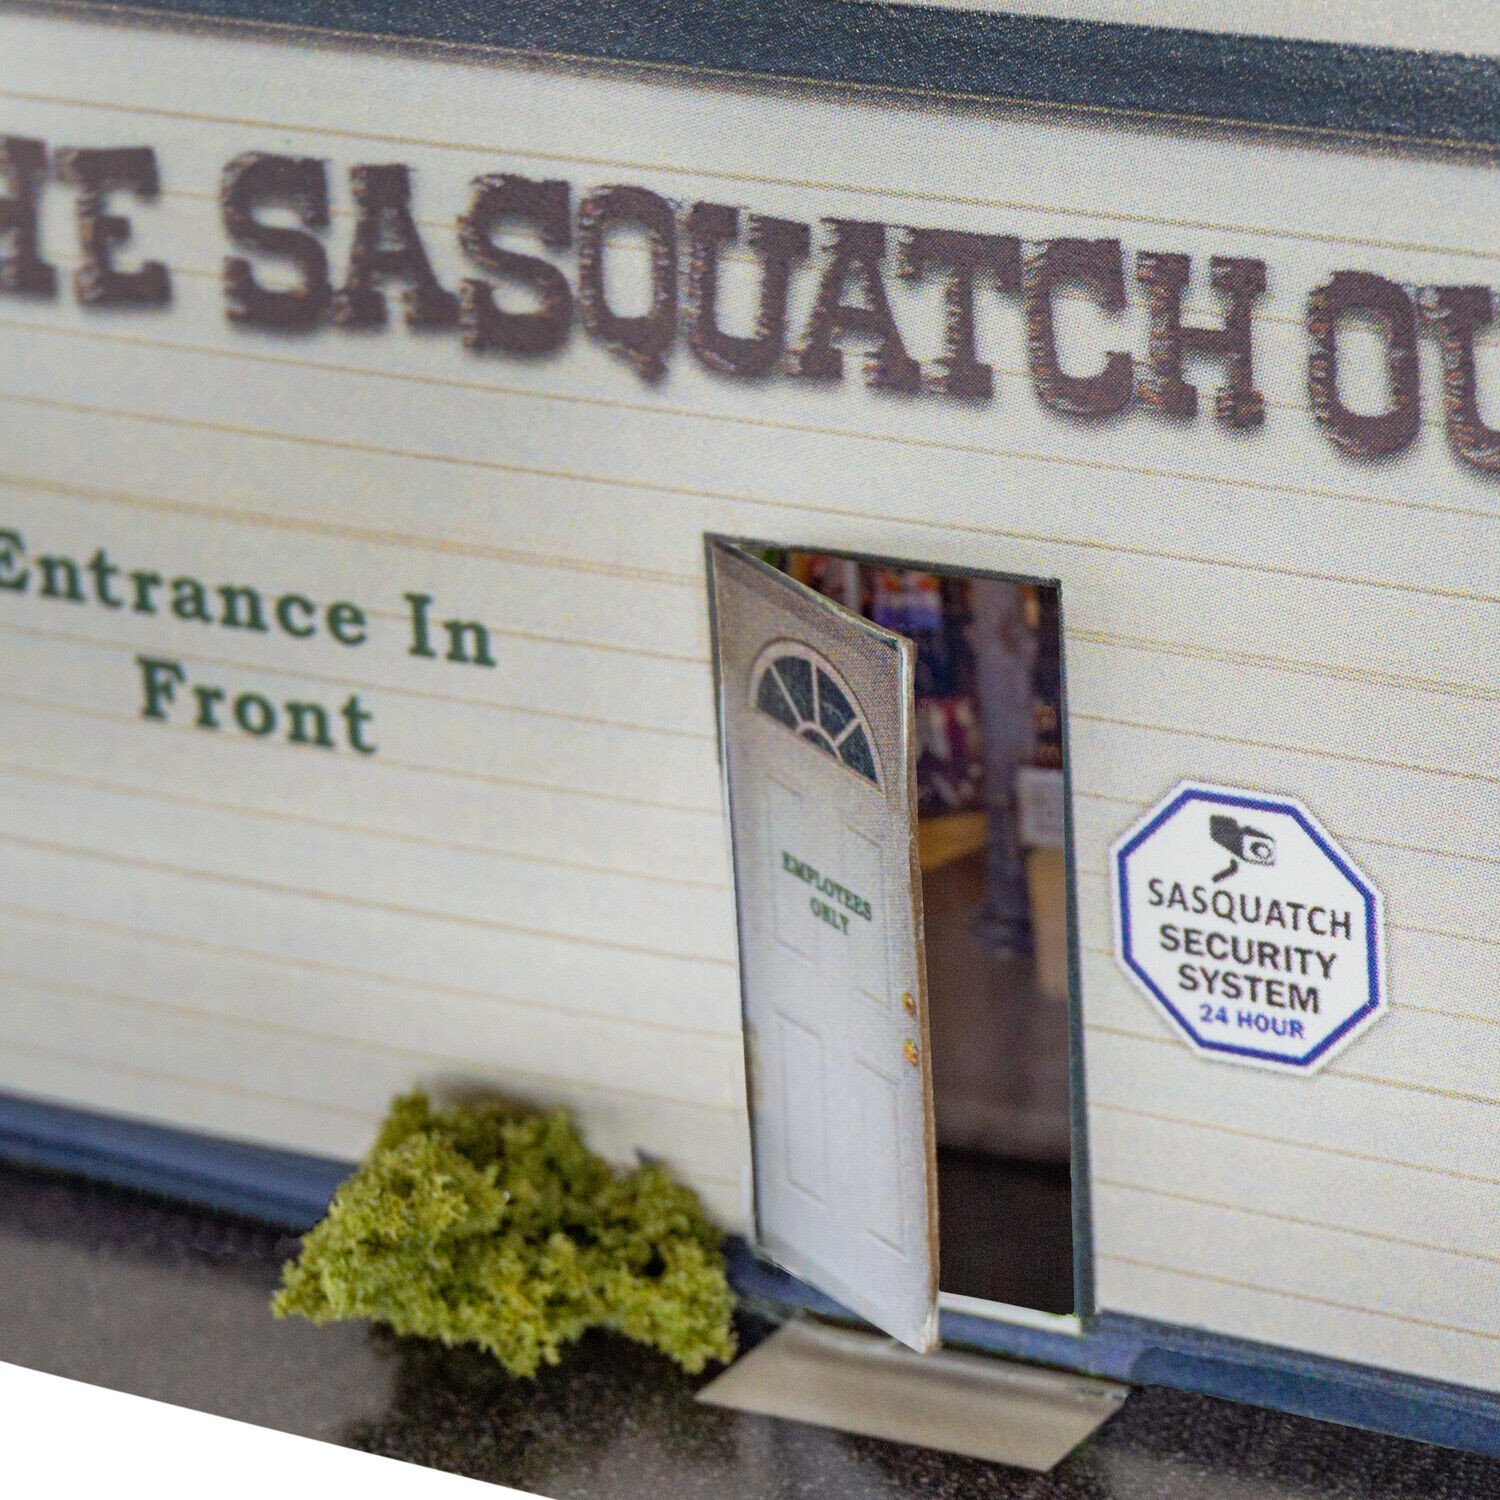 BK 6443 1:64 Scale "Sasquatch Outpost" Photo Real Scale Building Kit